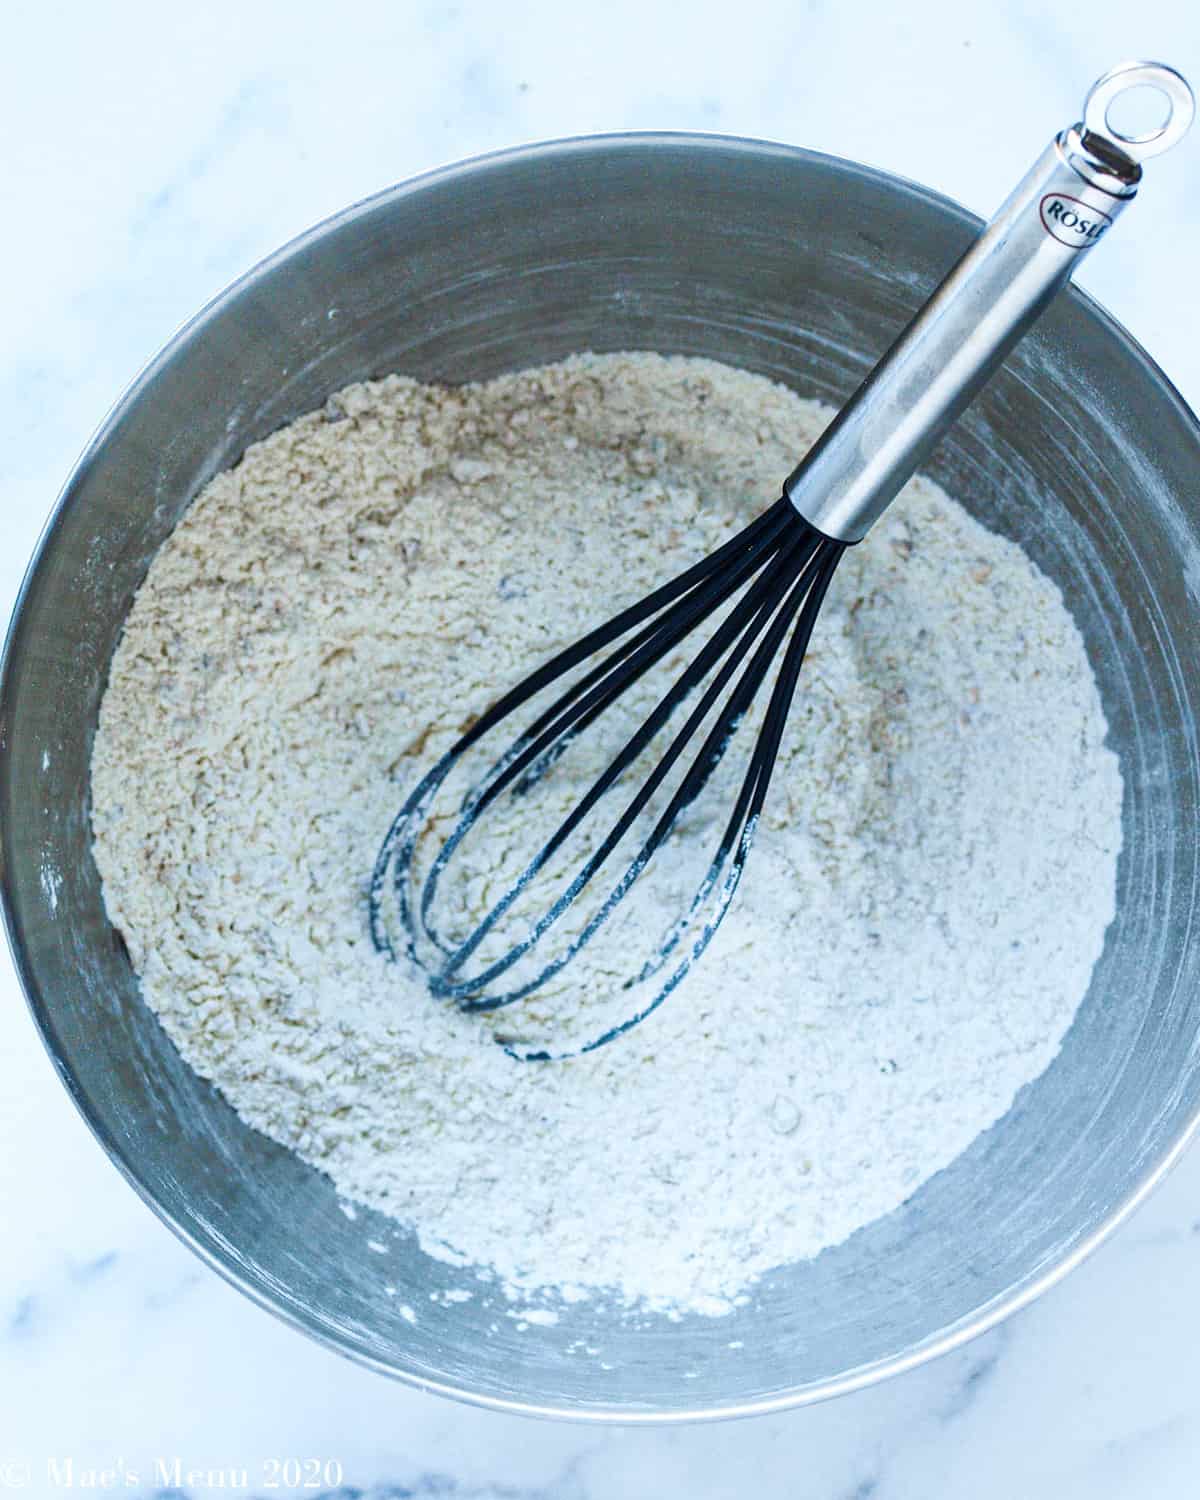 Whisking together all of the dry ingredients in a large metal mixing bowl